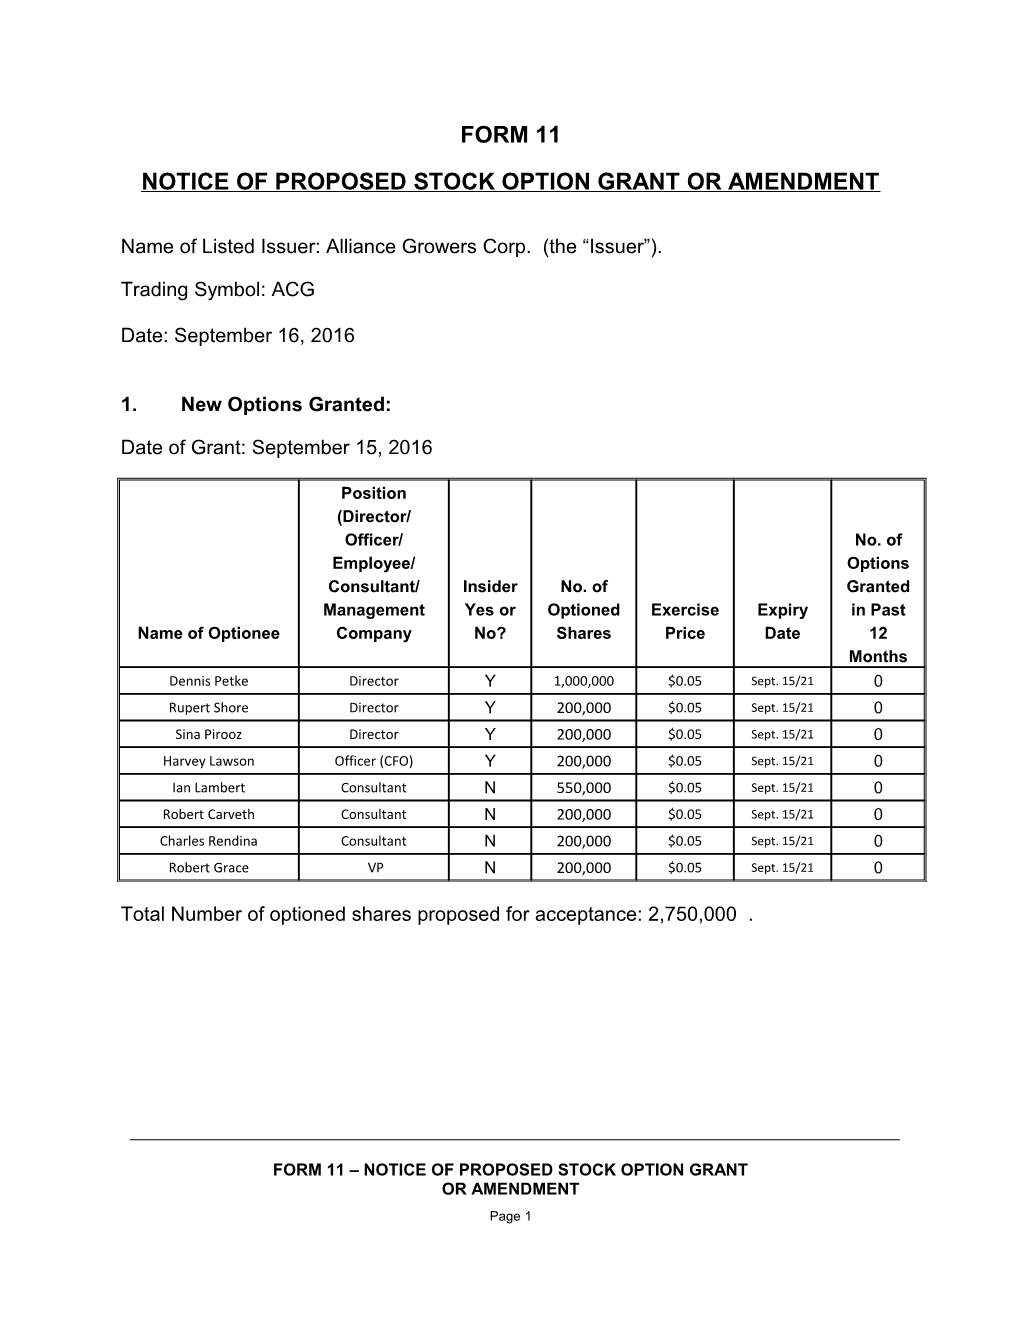 Notice of Proposed Stock Option Grant Or Amendment